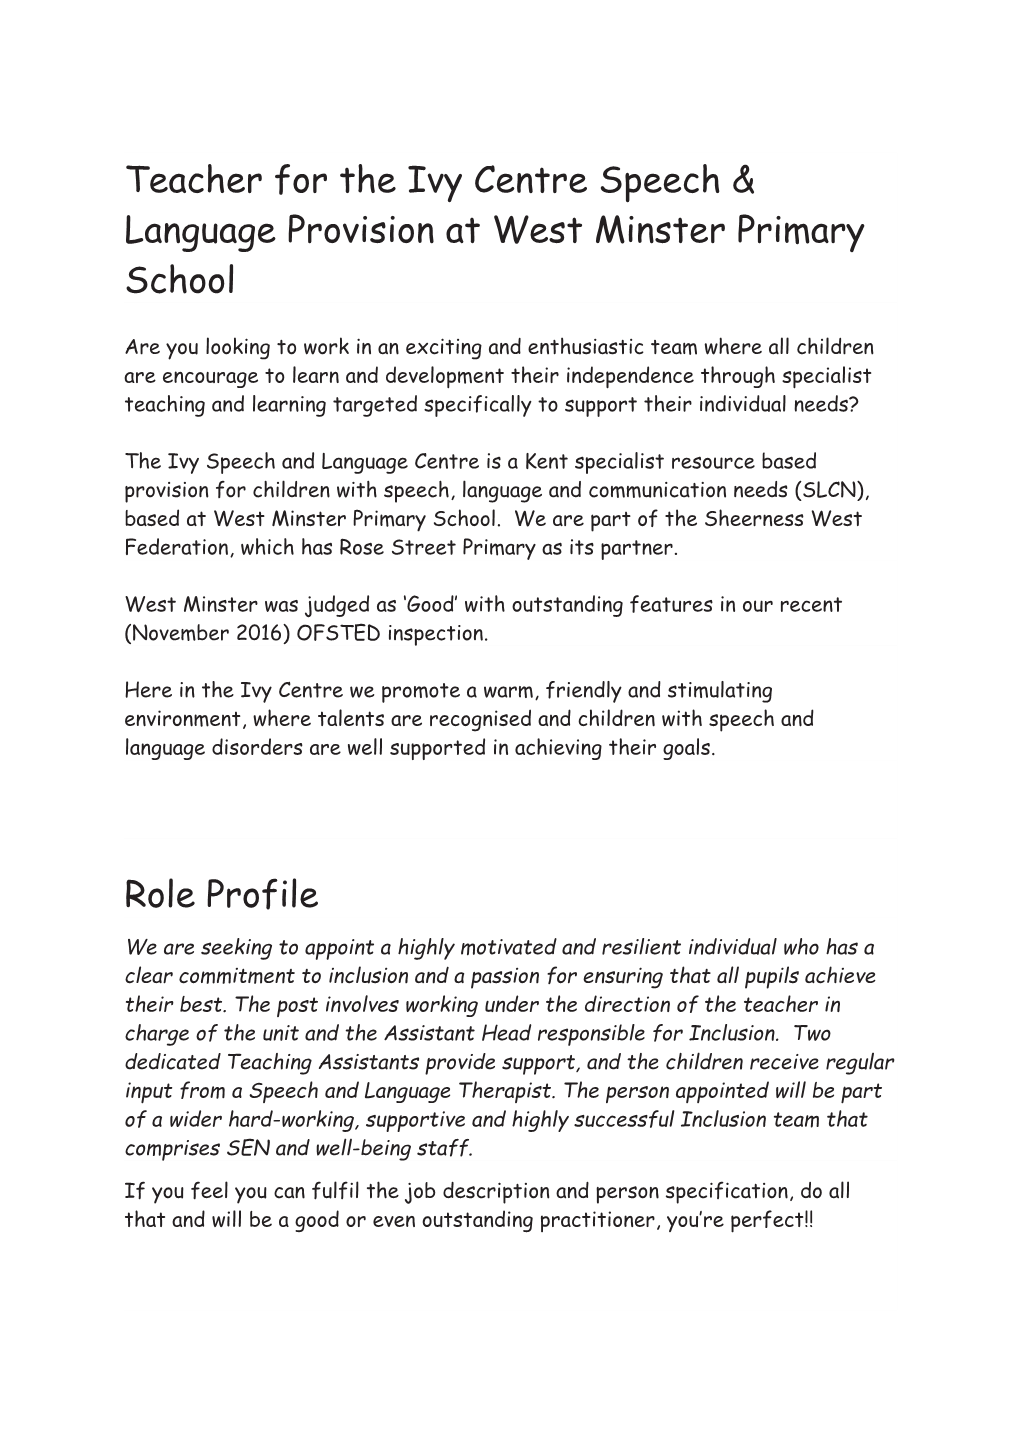 Teacher for the Ivy Centre Speech & Language Provision at West Minster Primary School